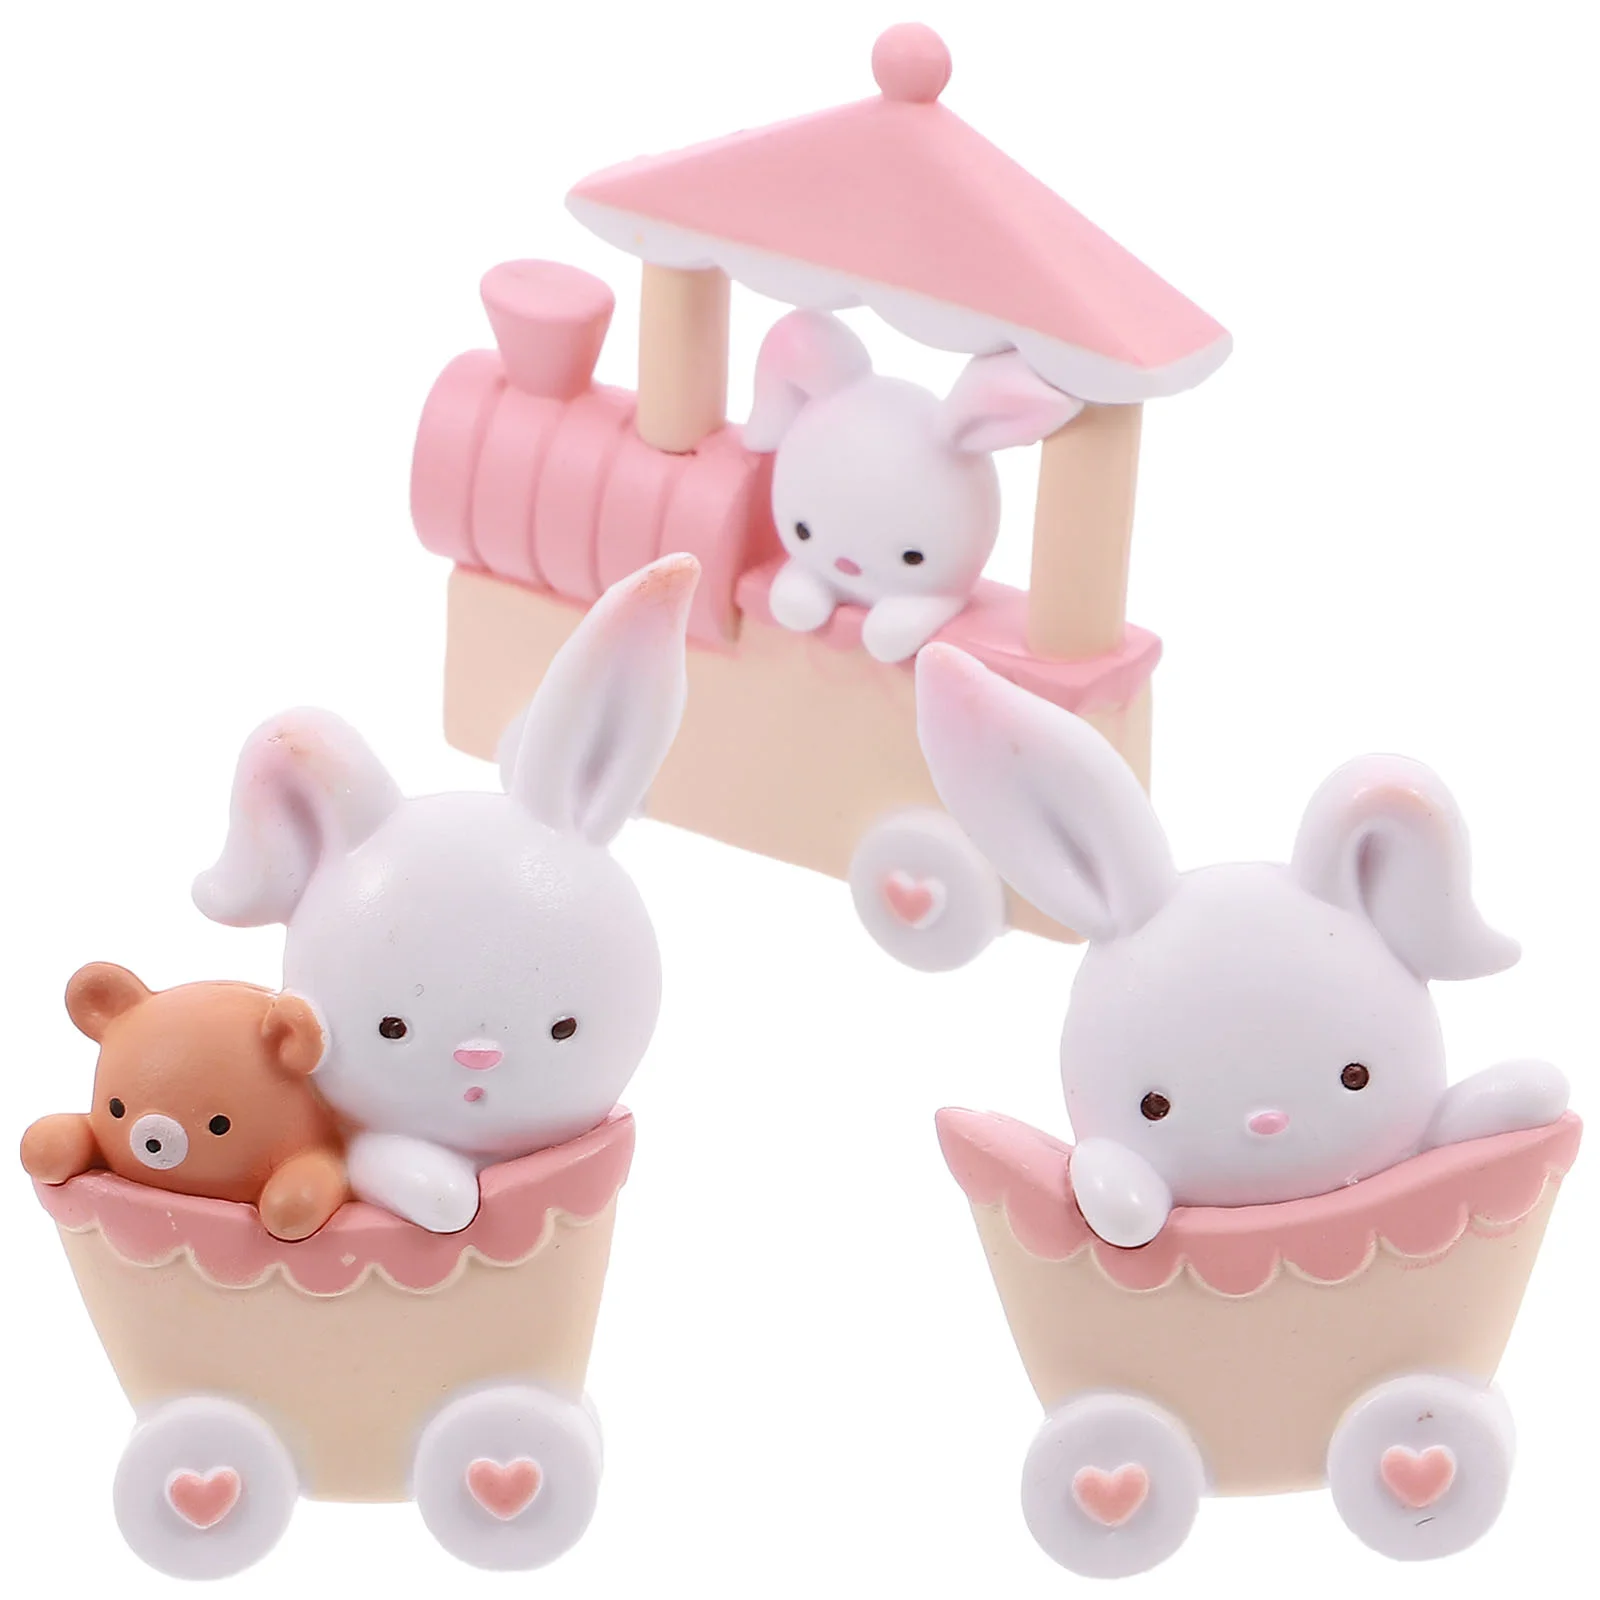 

Resin Animal Figurines Train Toy Set Cupcake Decorating Lovely Adornment Table Decoration Statue